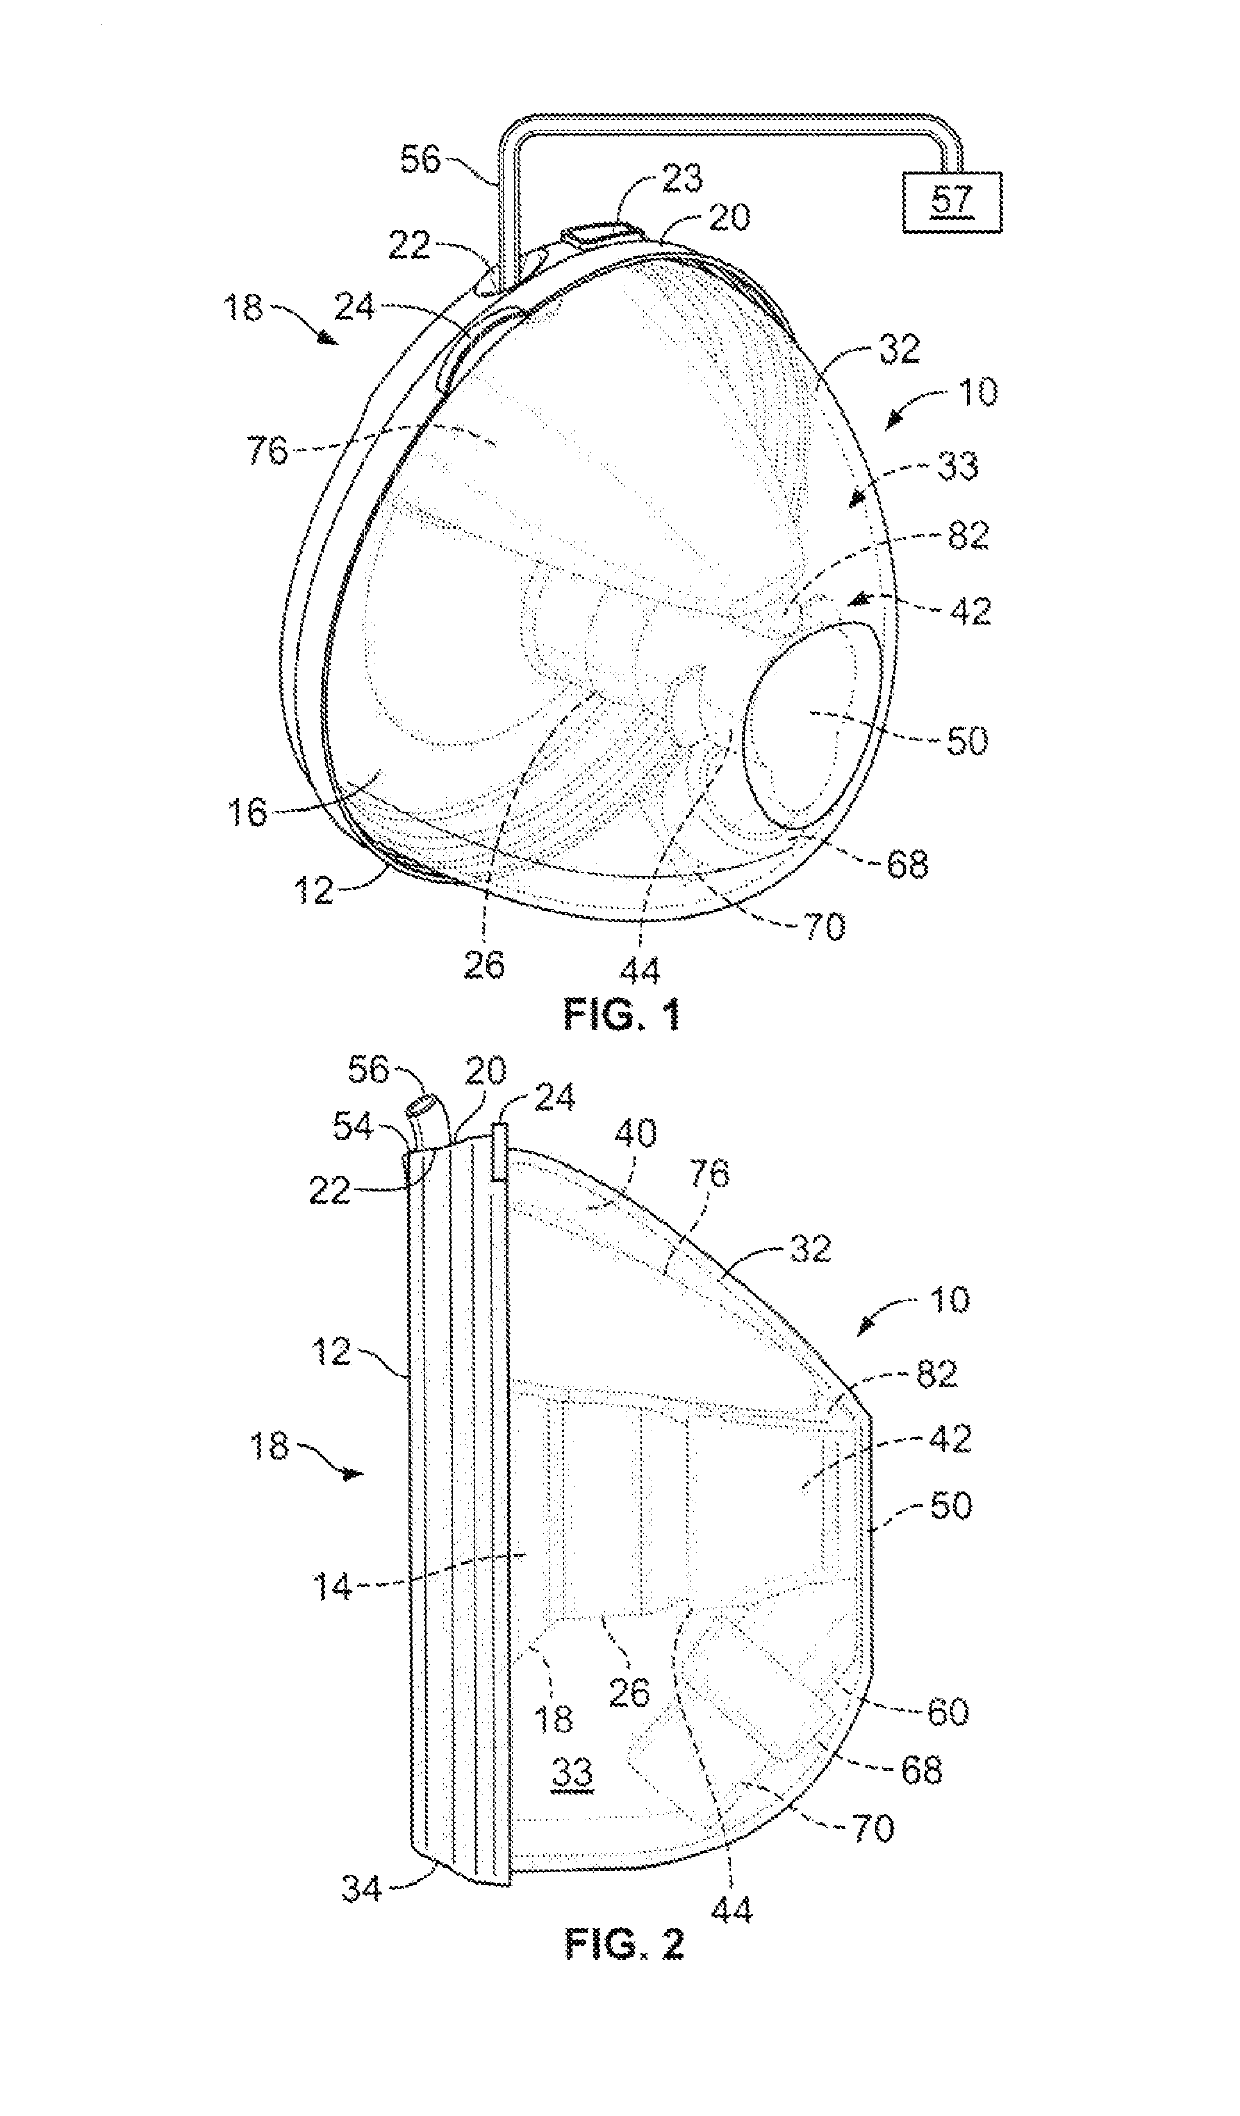 Submersible breast pump protection mechanism for a breast milk collection device with self-contained reservoir